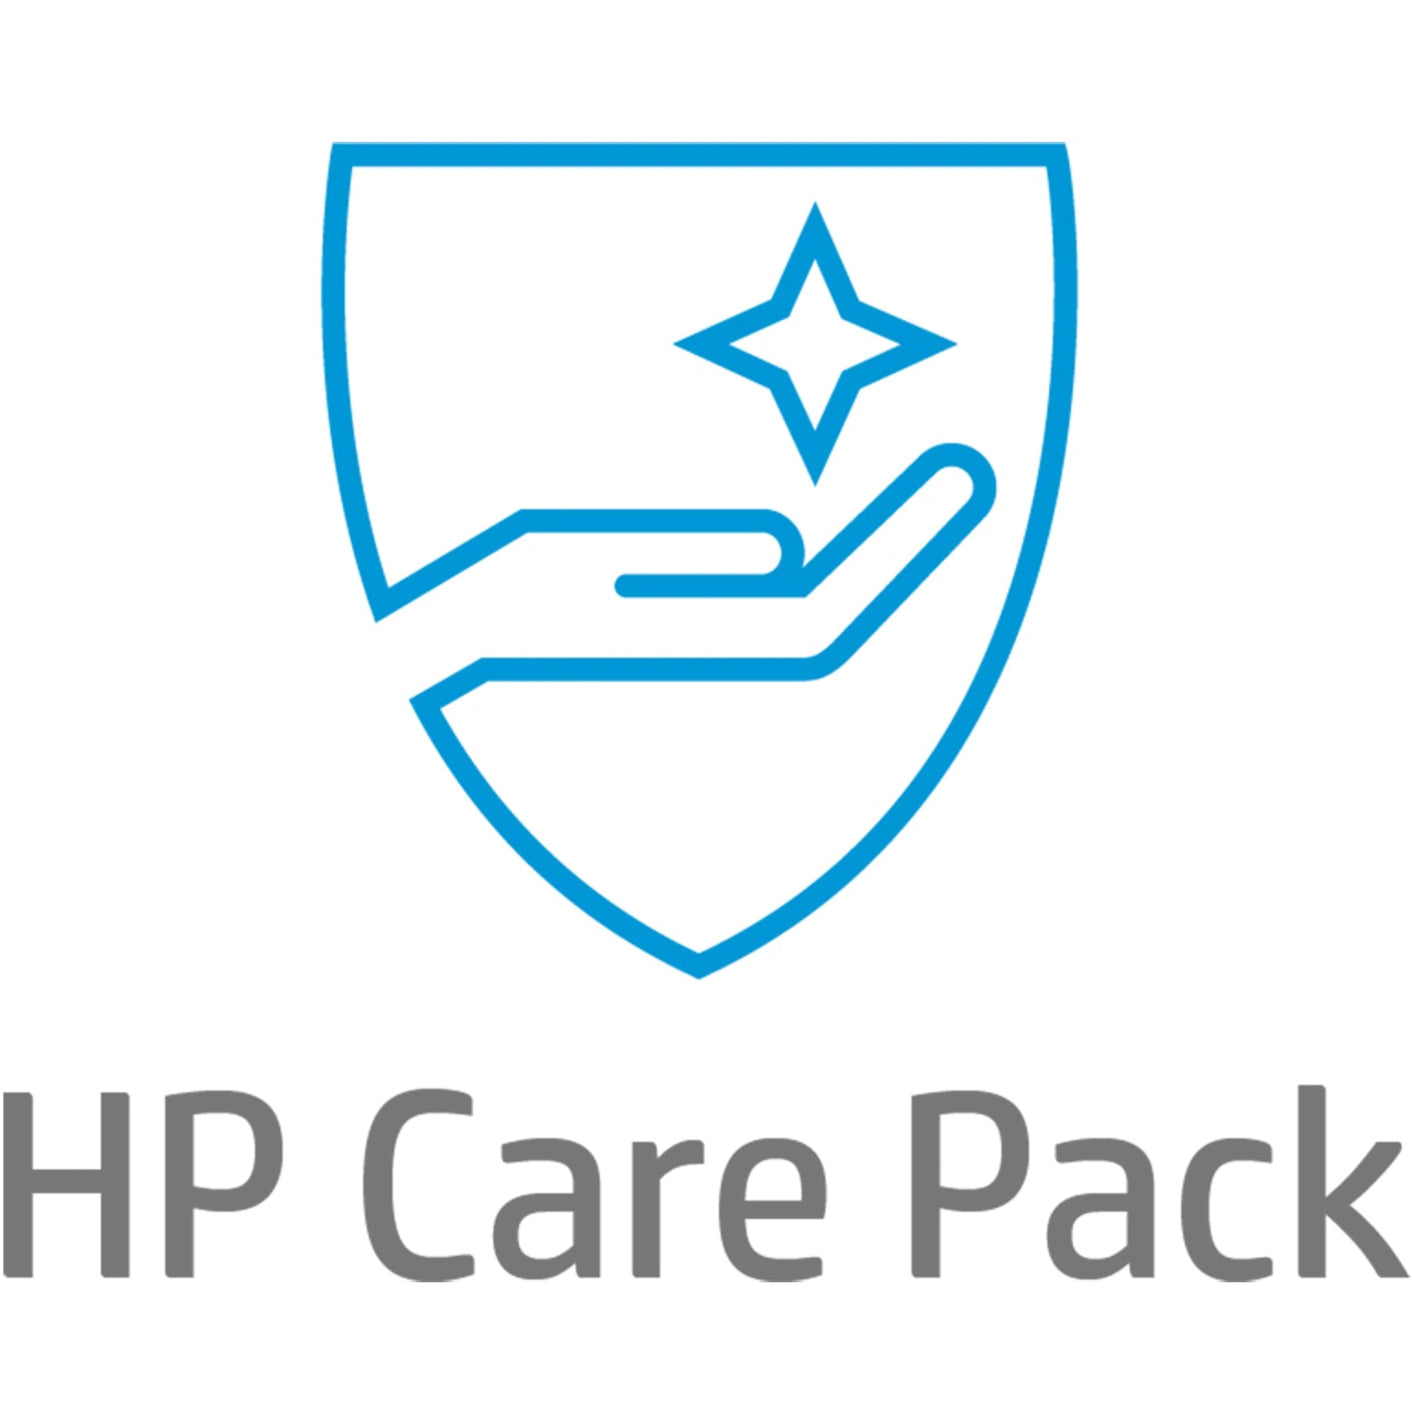 HP Care Pack - 3 Year - Service (UC296E)